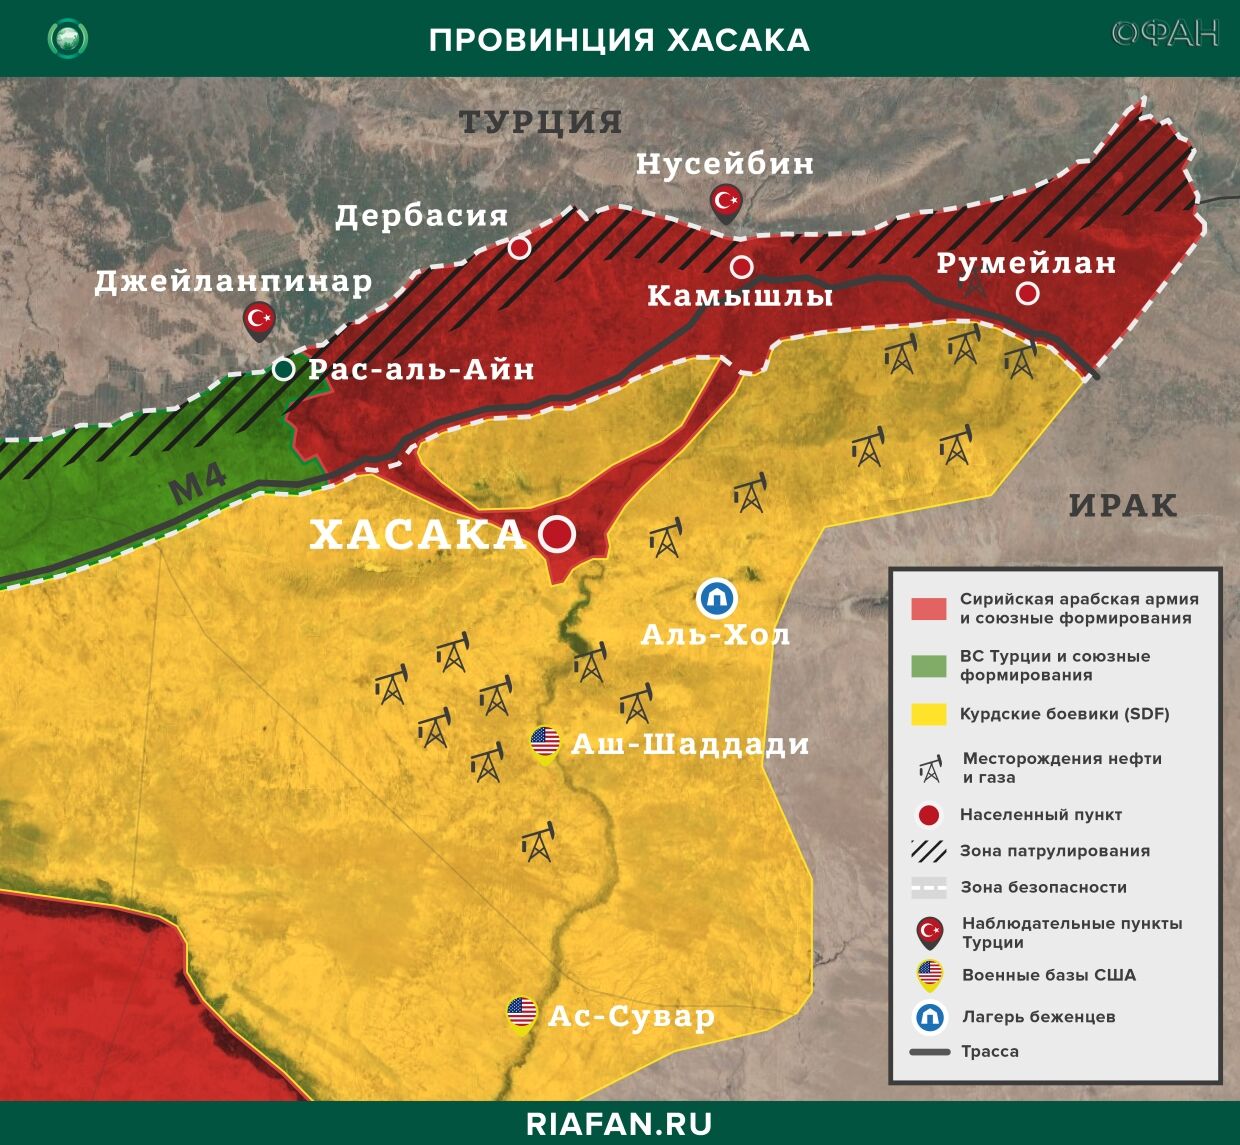 Syria news 25 April 22.30: Turkey forces militants to go to Libya, CAA neutralized 50 IEDs in Damascus and Dara